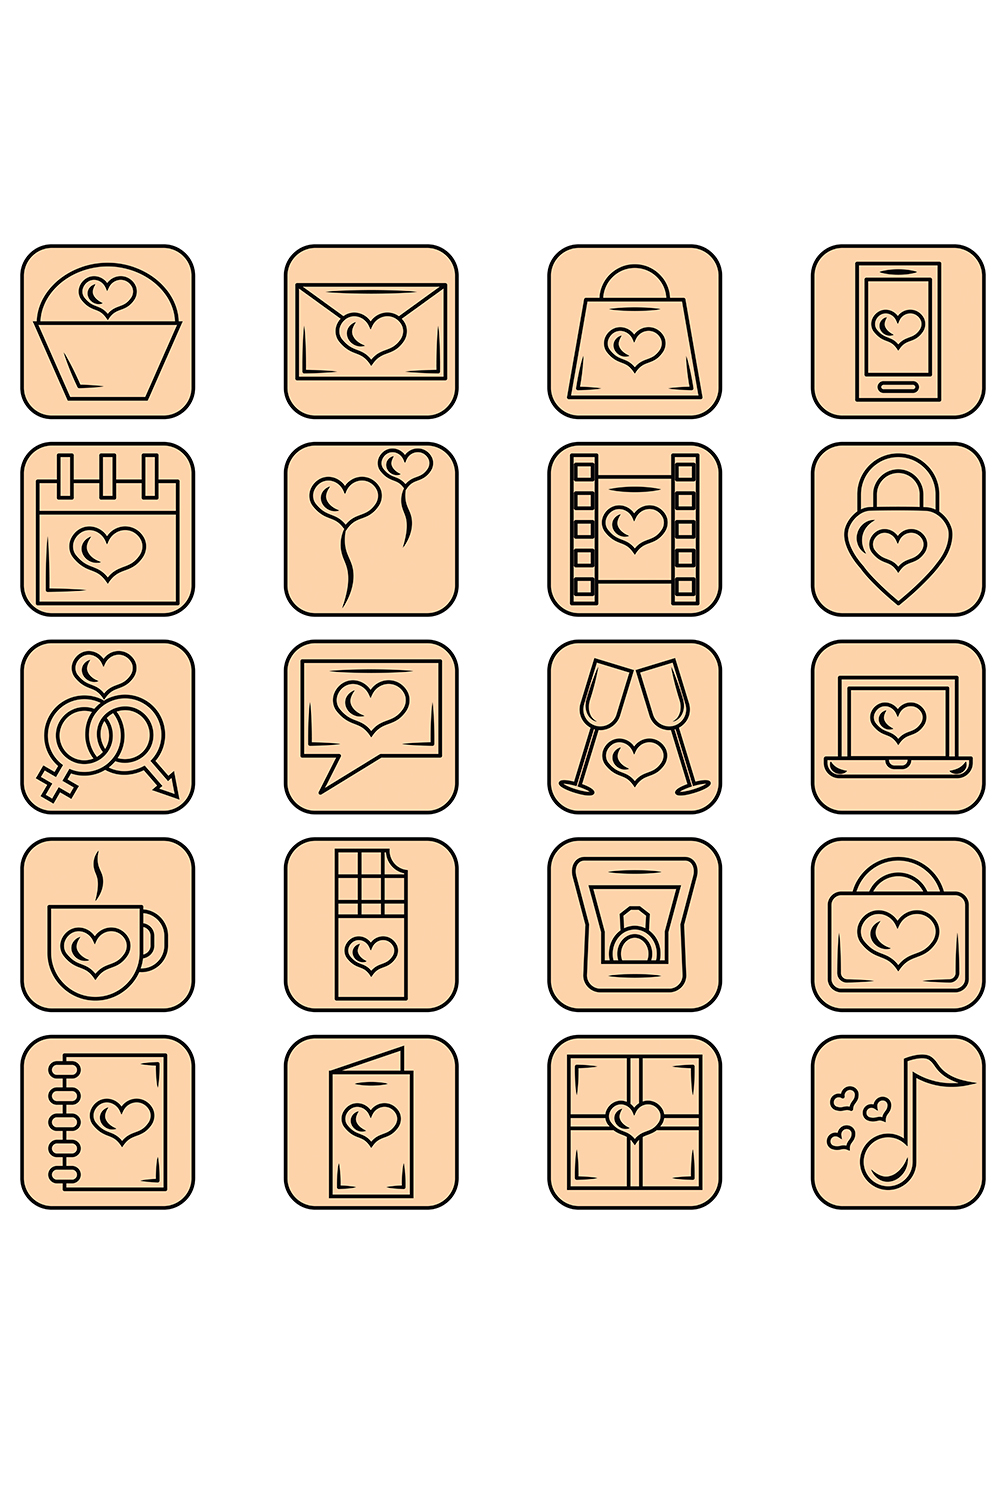 Bunch of different icons that are on a white background.